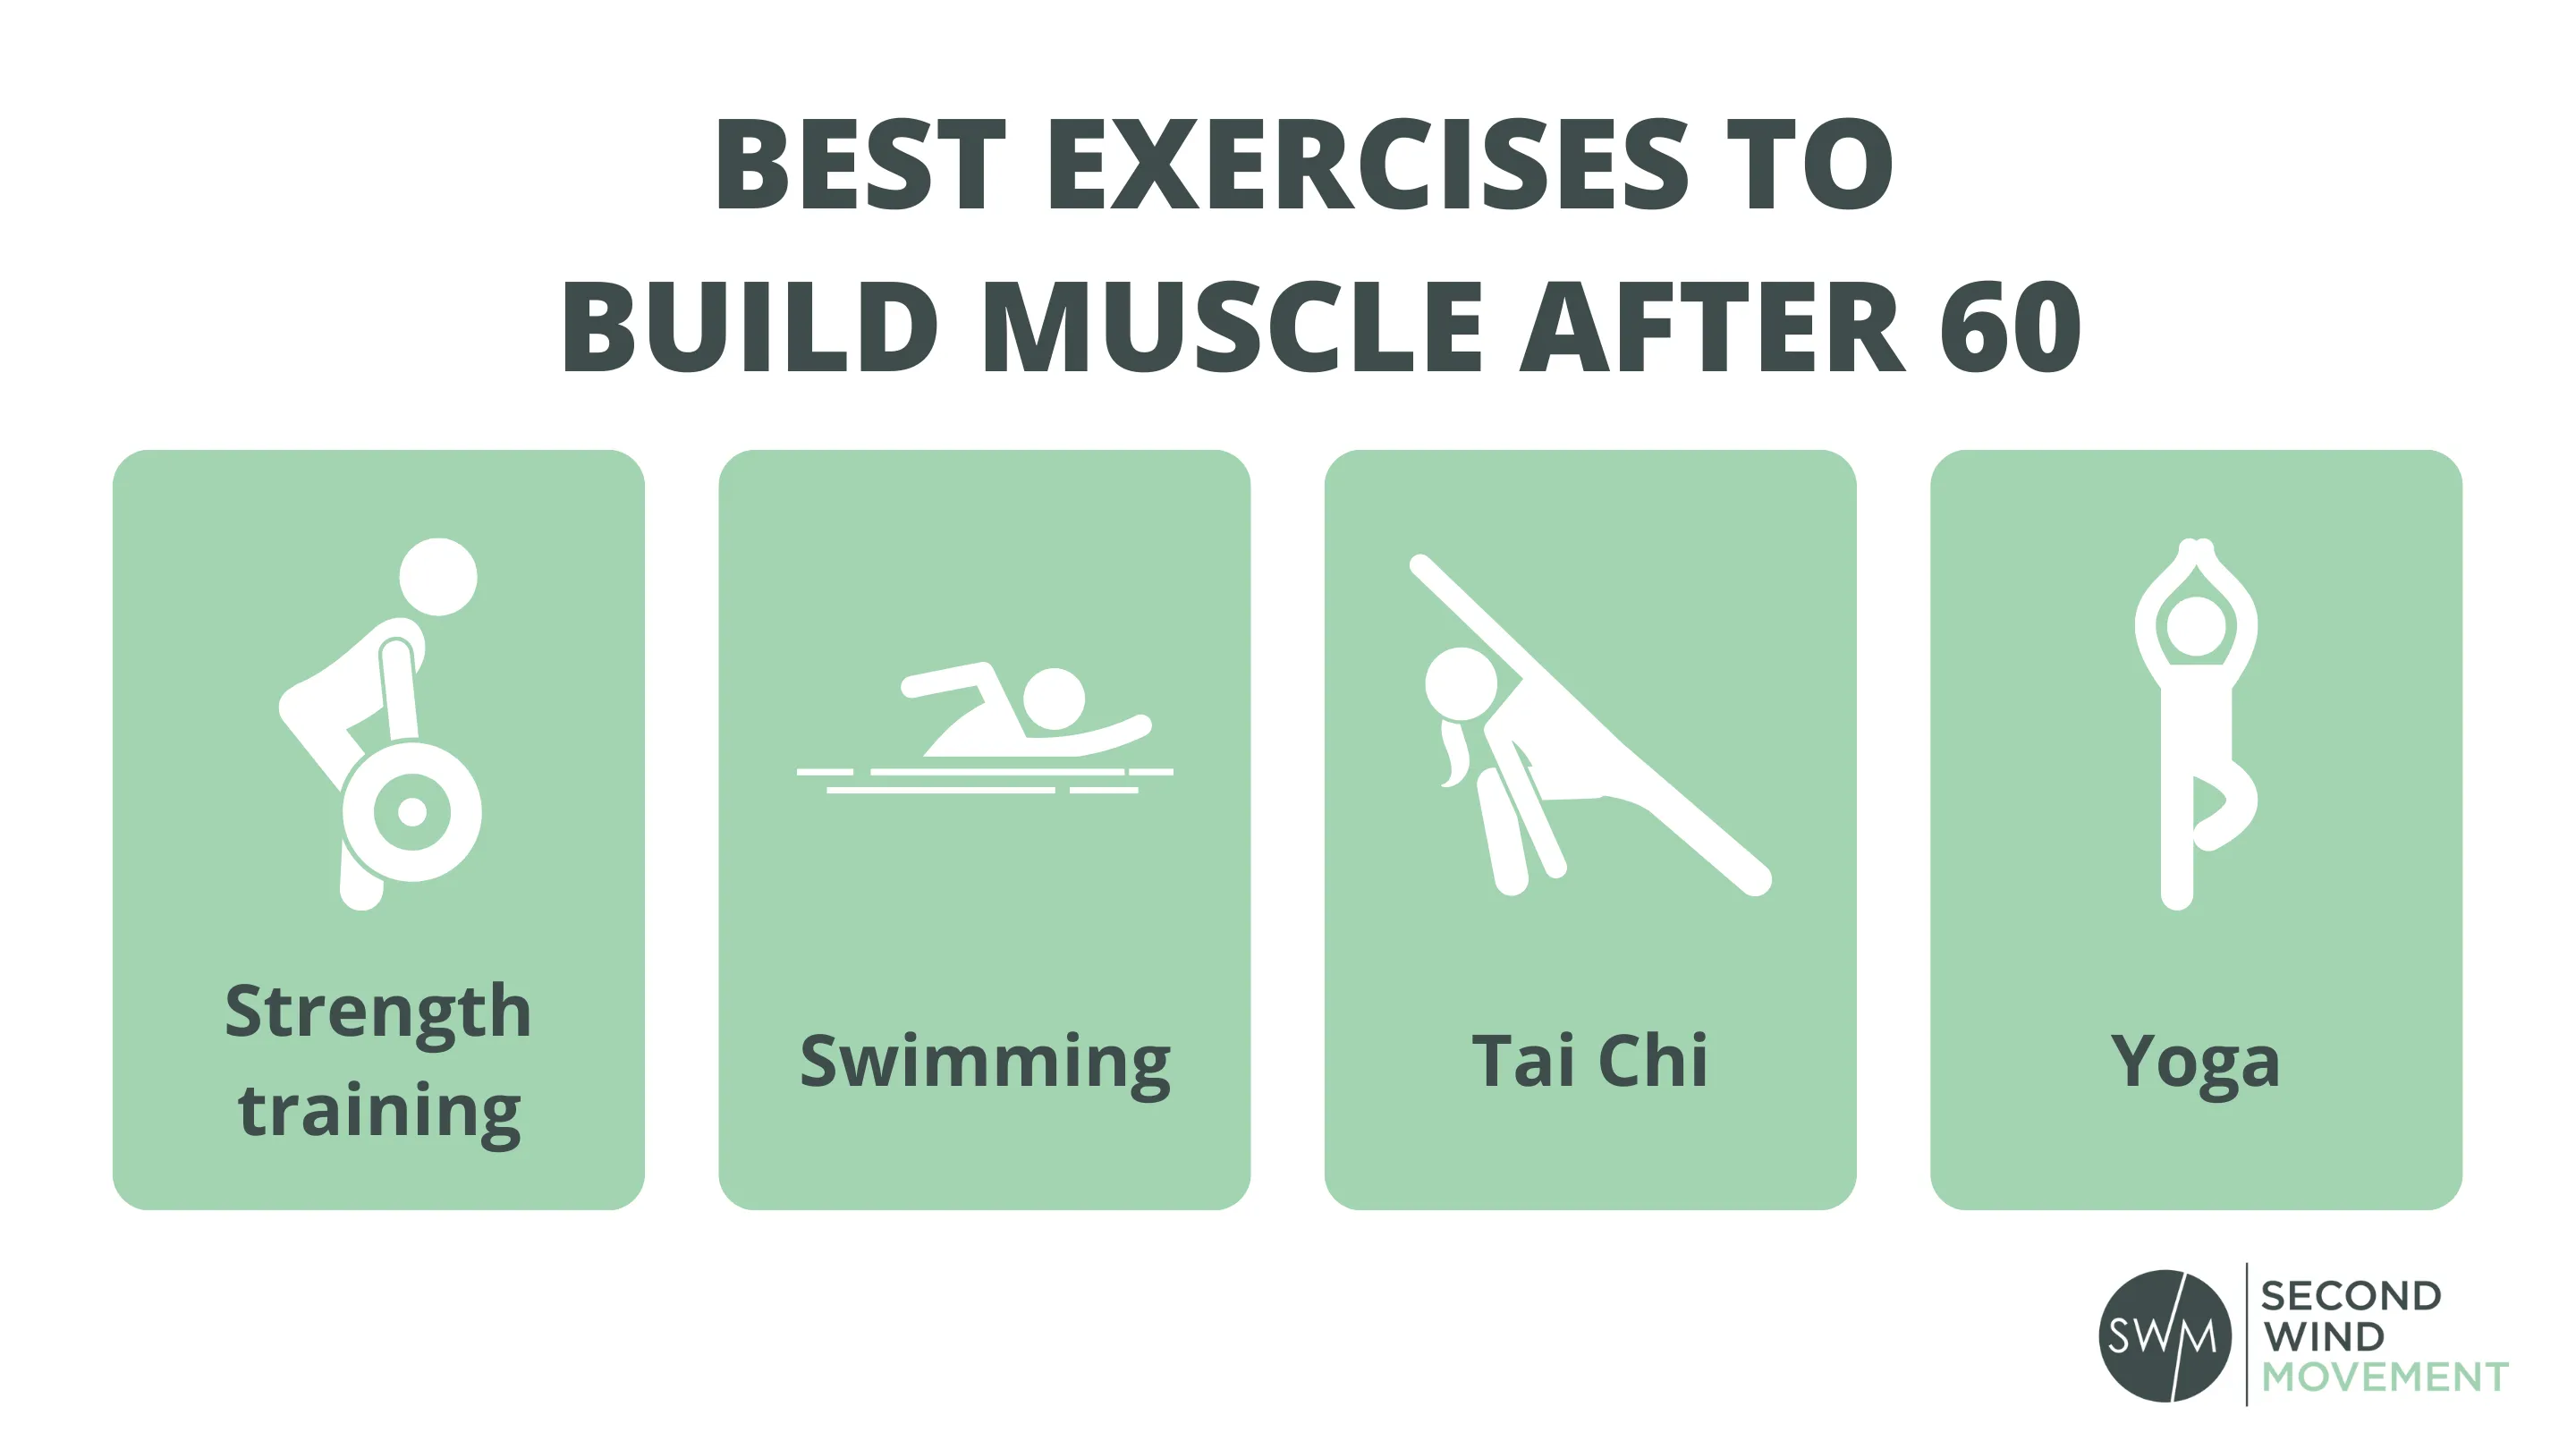 best exercises to build muscle after 60 are strength training, swimming, tai chi and yoga